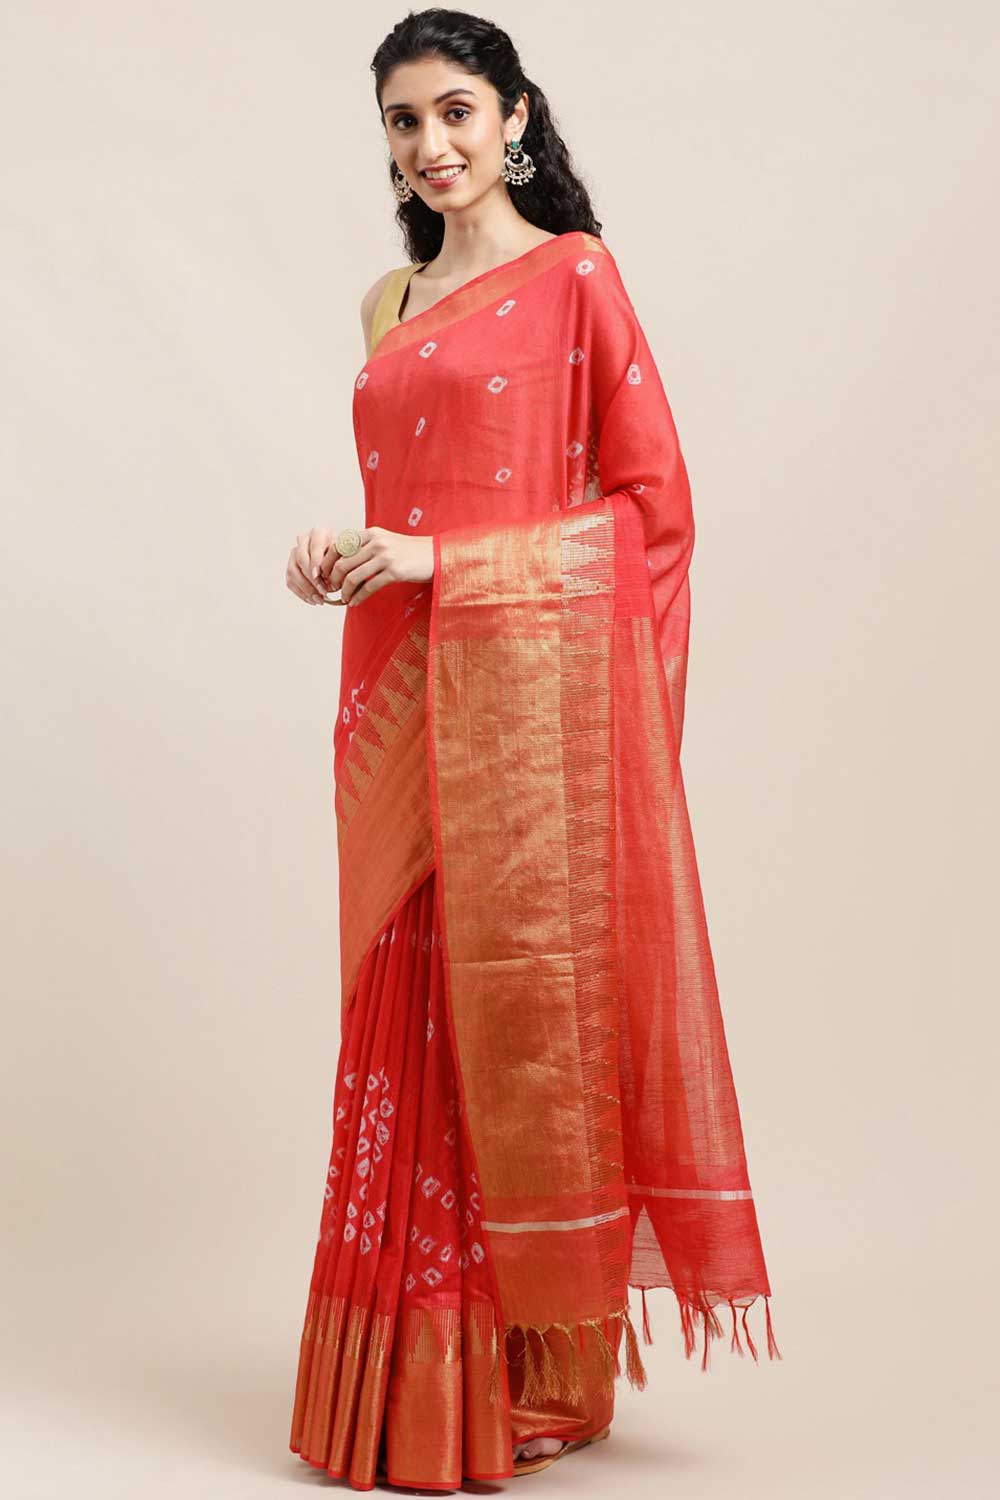 Buy Paula Red Zari Woven Blended Silk One Minute Saree Online - One Minute Saree